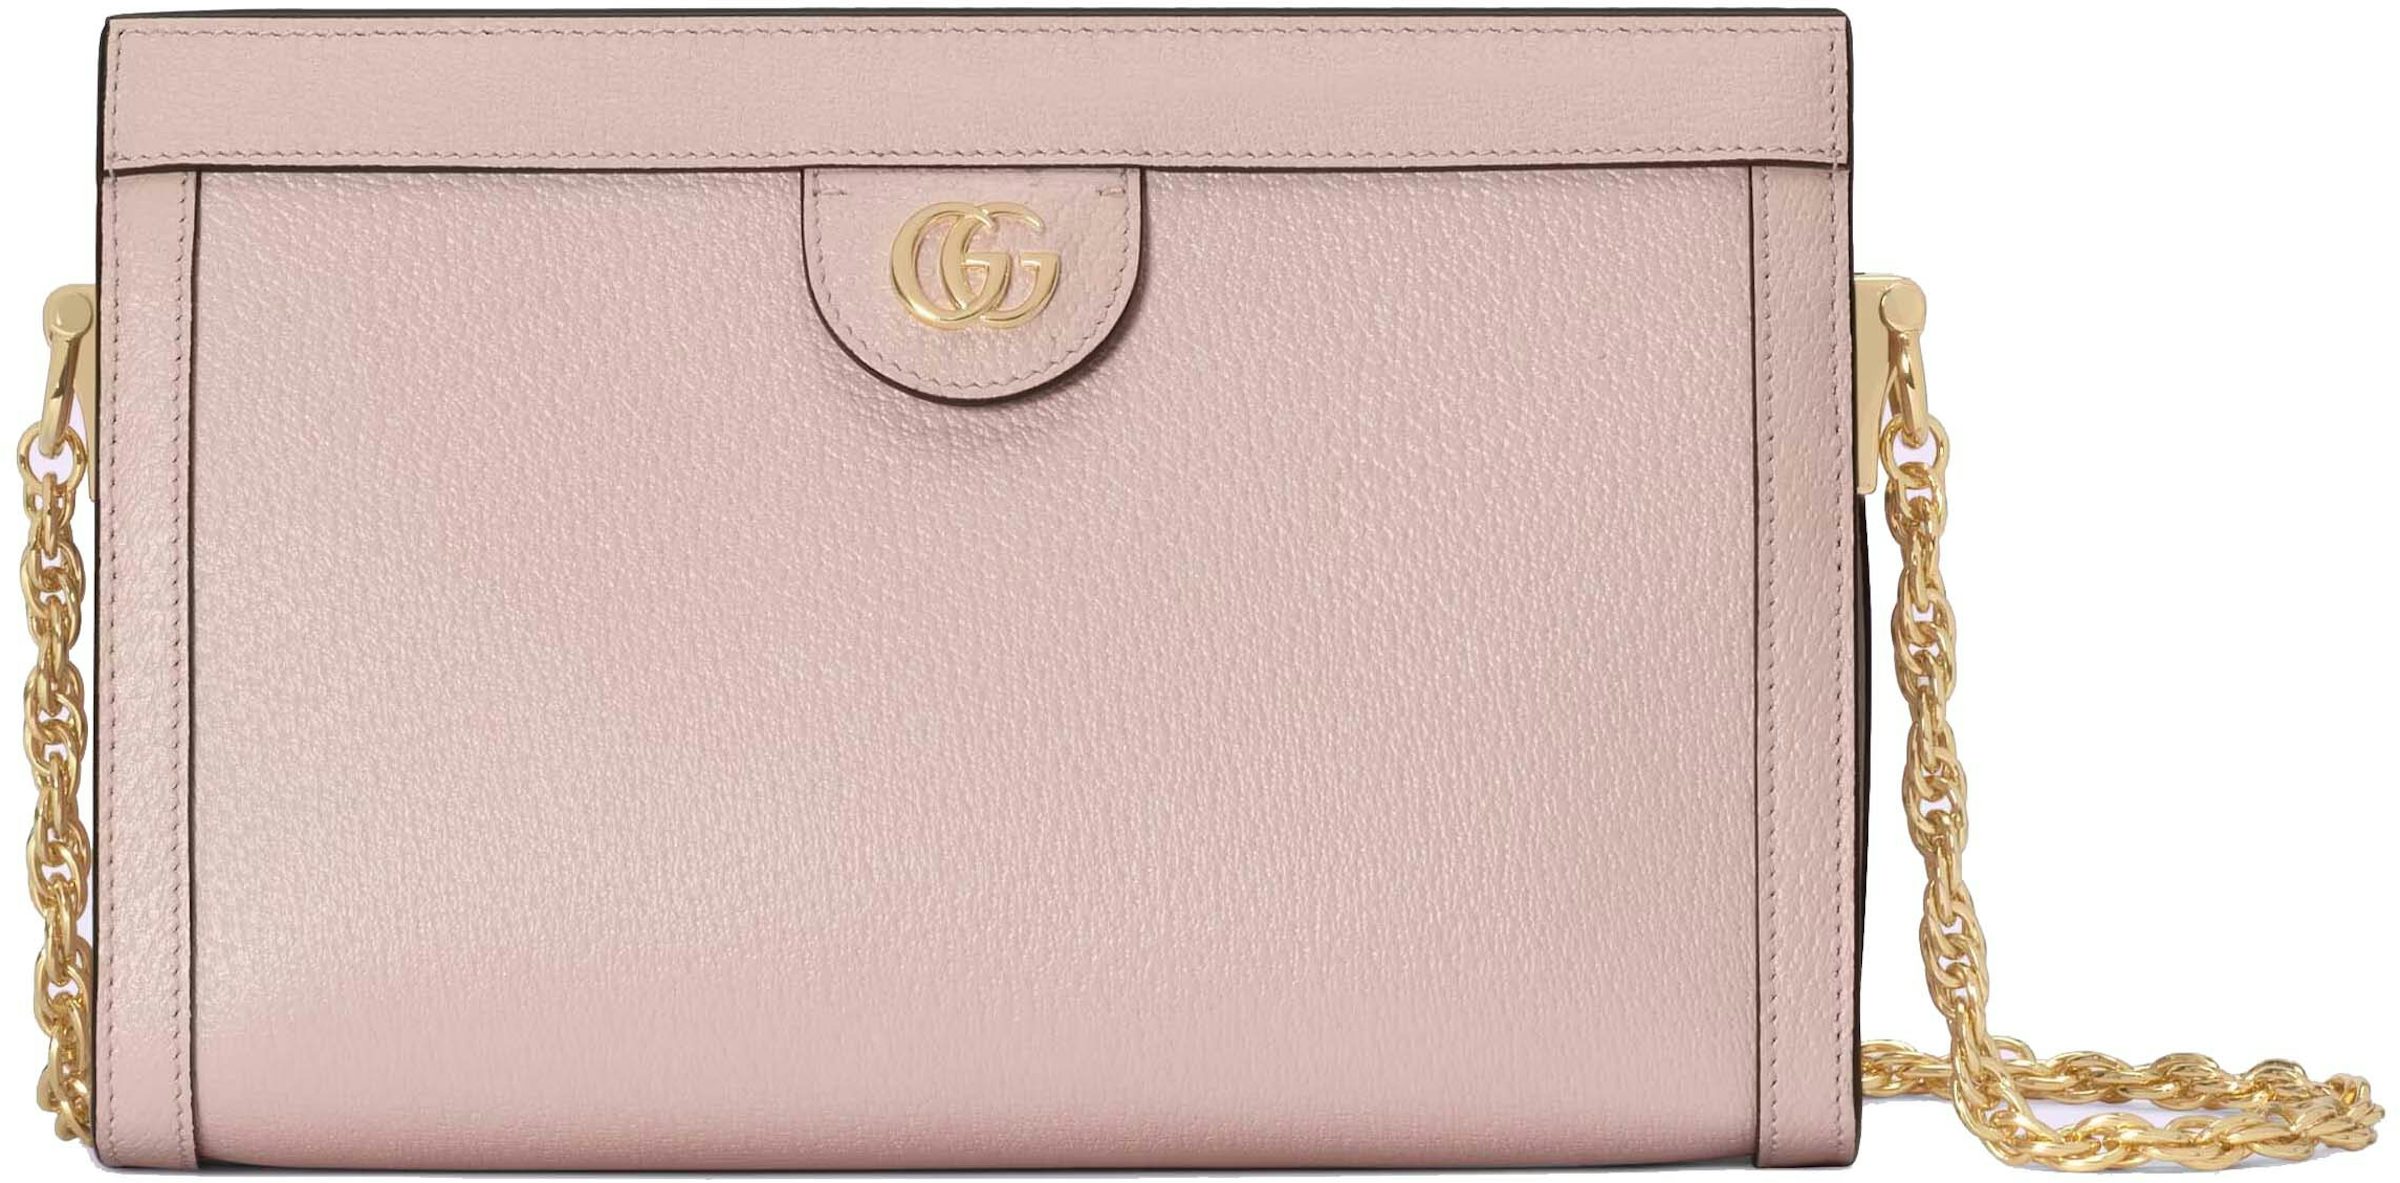 Gucci Ophidia Double G tote bag, Pink